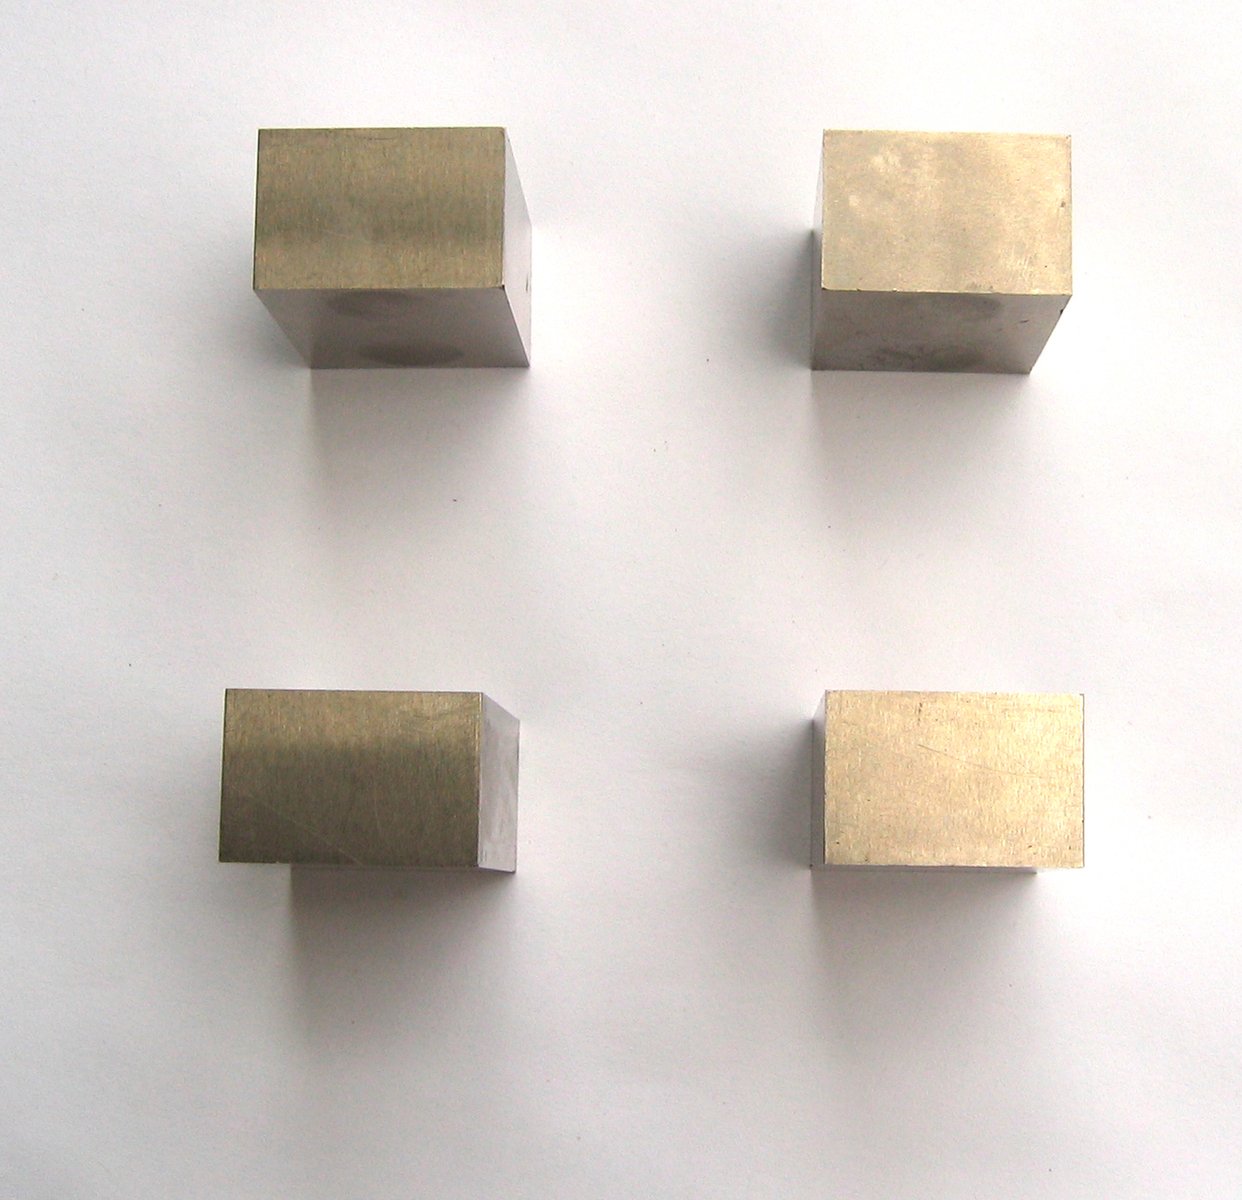 three square and rectangular magnets are placed on a table